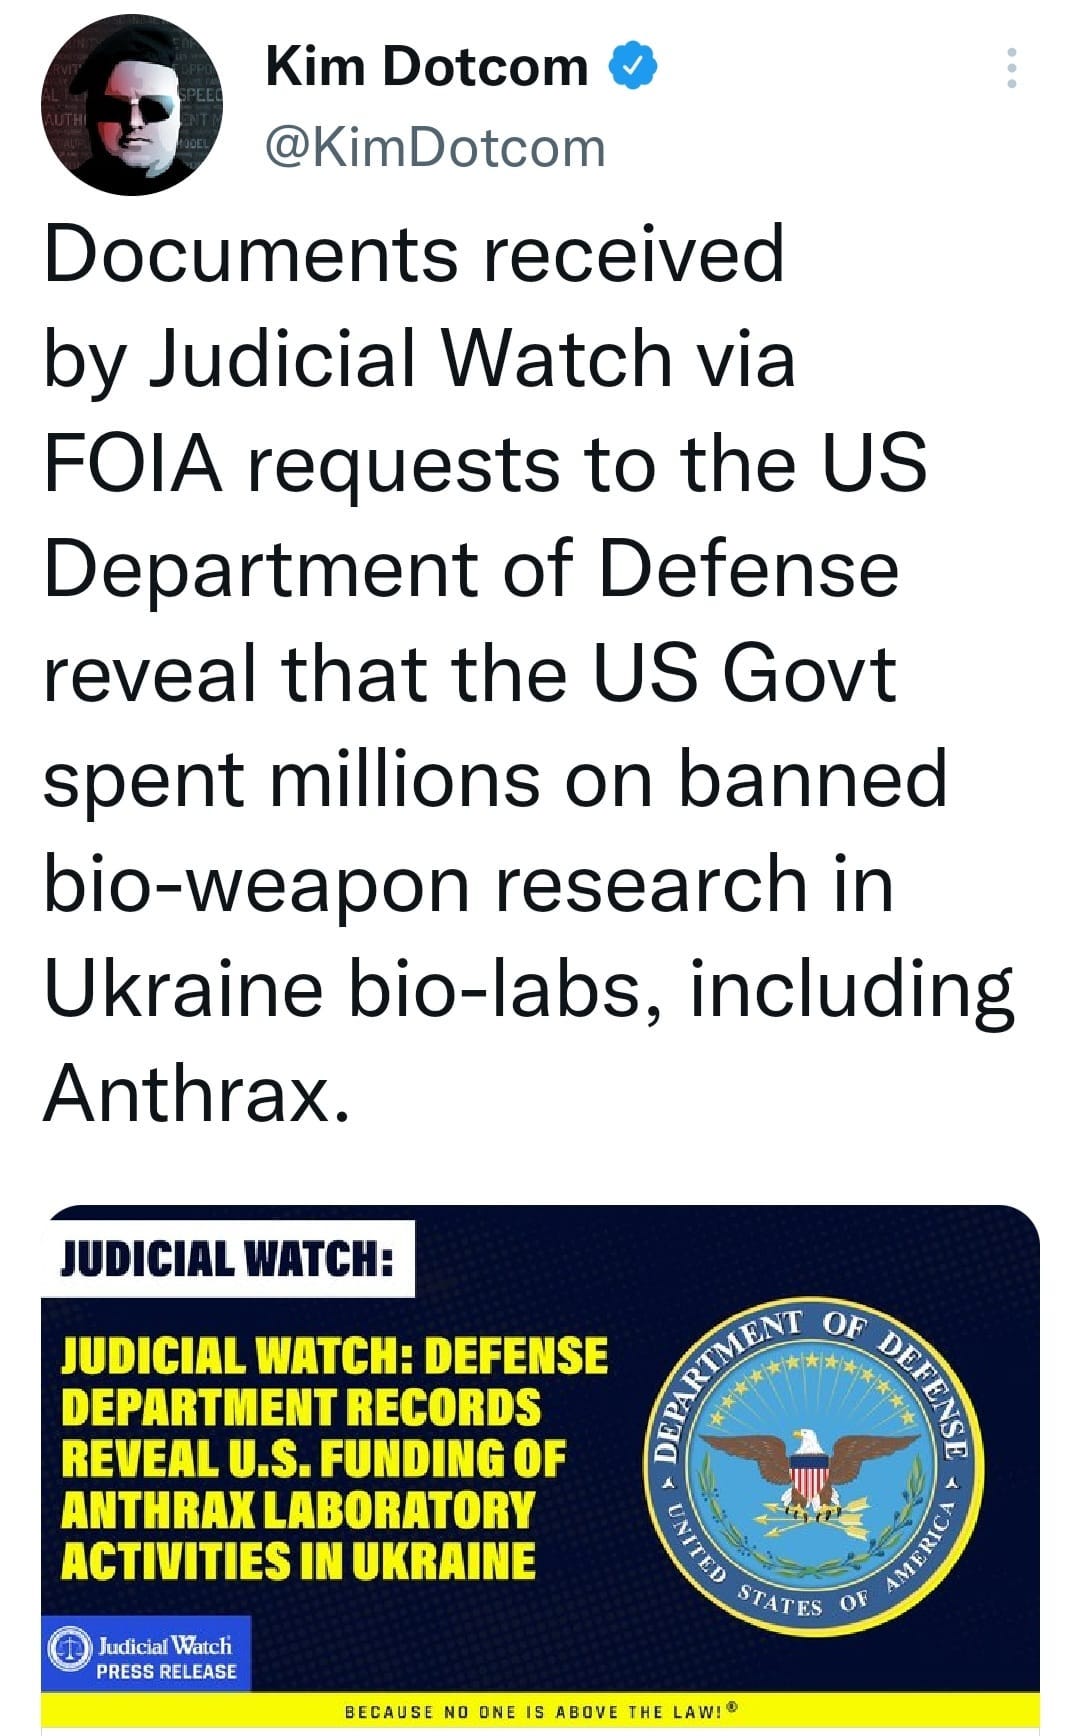 May be an image of 1 person and text that says 'Kim Dotcom @KimDotcom Documents received by Judicial Watch via FOIA requests to the US Department of Defense reveal that the US Govt spent millions on banned bio-weapon research in Ukraine bio-labs, including Anthrax. JUDICIAL WATCH: JUDICIAL WATCH: DEFENSE PERNTNAY OF DEFENSE DETIANA DEPARTMENT RECORDS REVEAL U.S. FUNDING OF ANTHRAX LABORATORY ACTIVITIES IN UKRAINE Judicial Watch PRRELAE STATES OF BECAUSE NO ONE ABOVE THE LAWI'